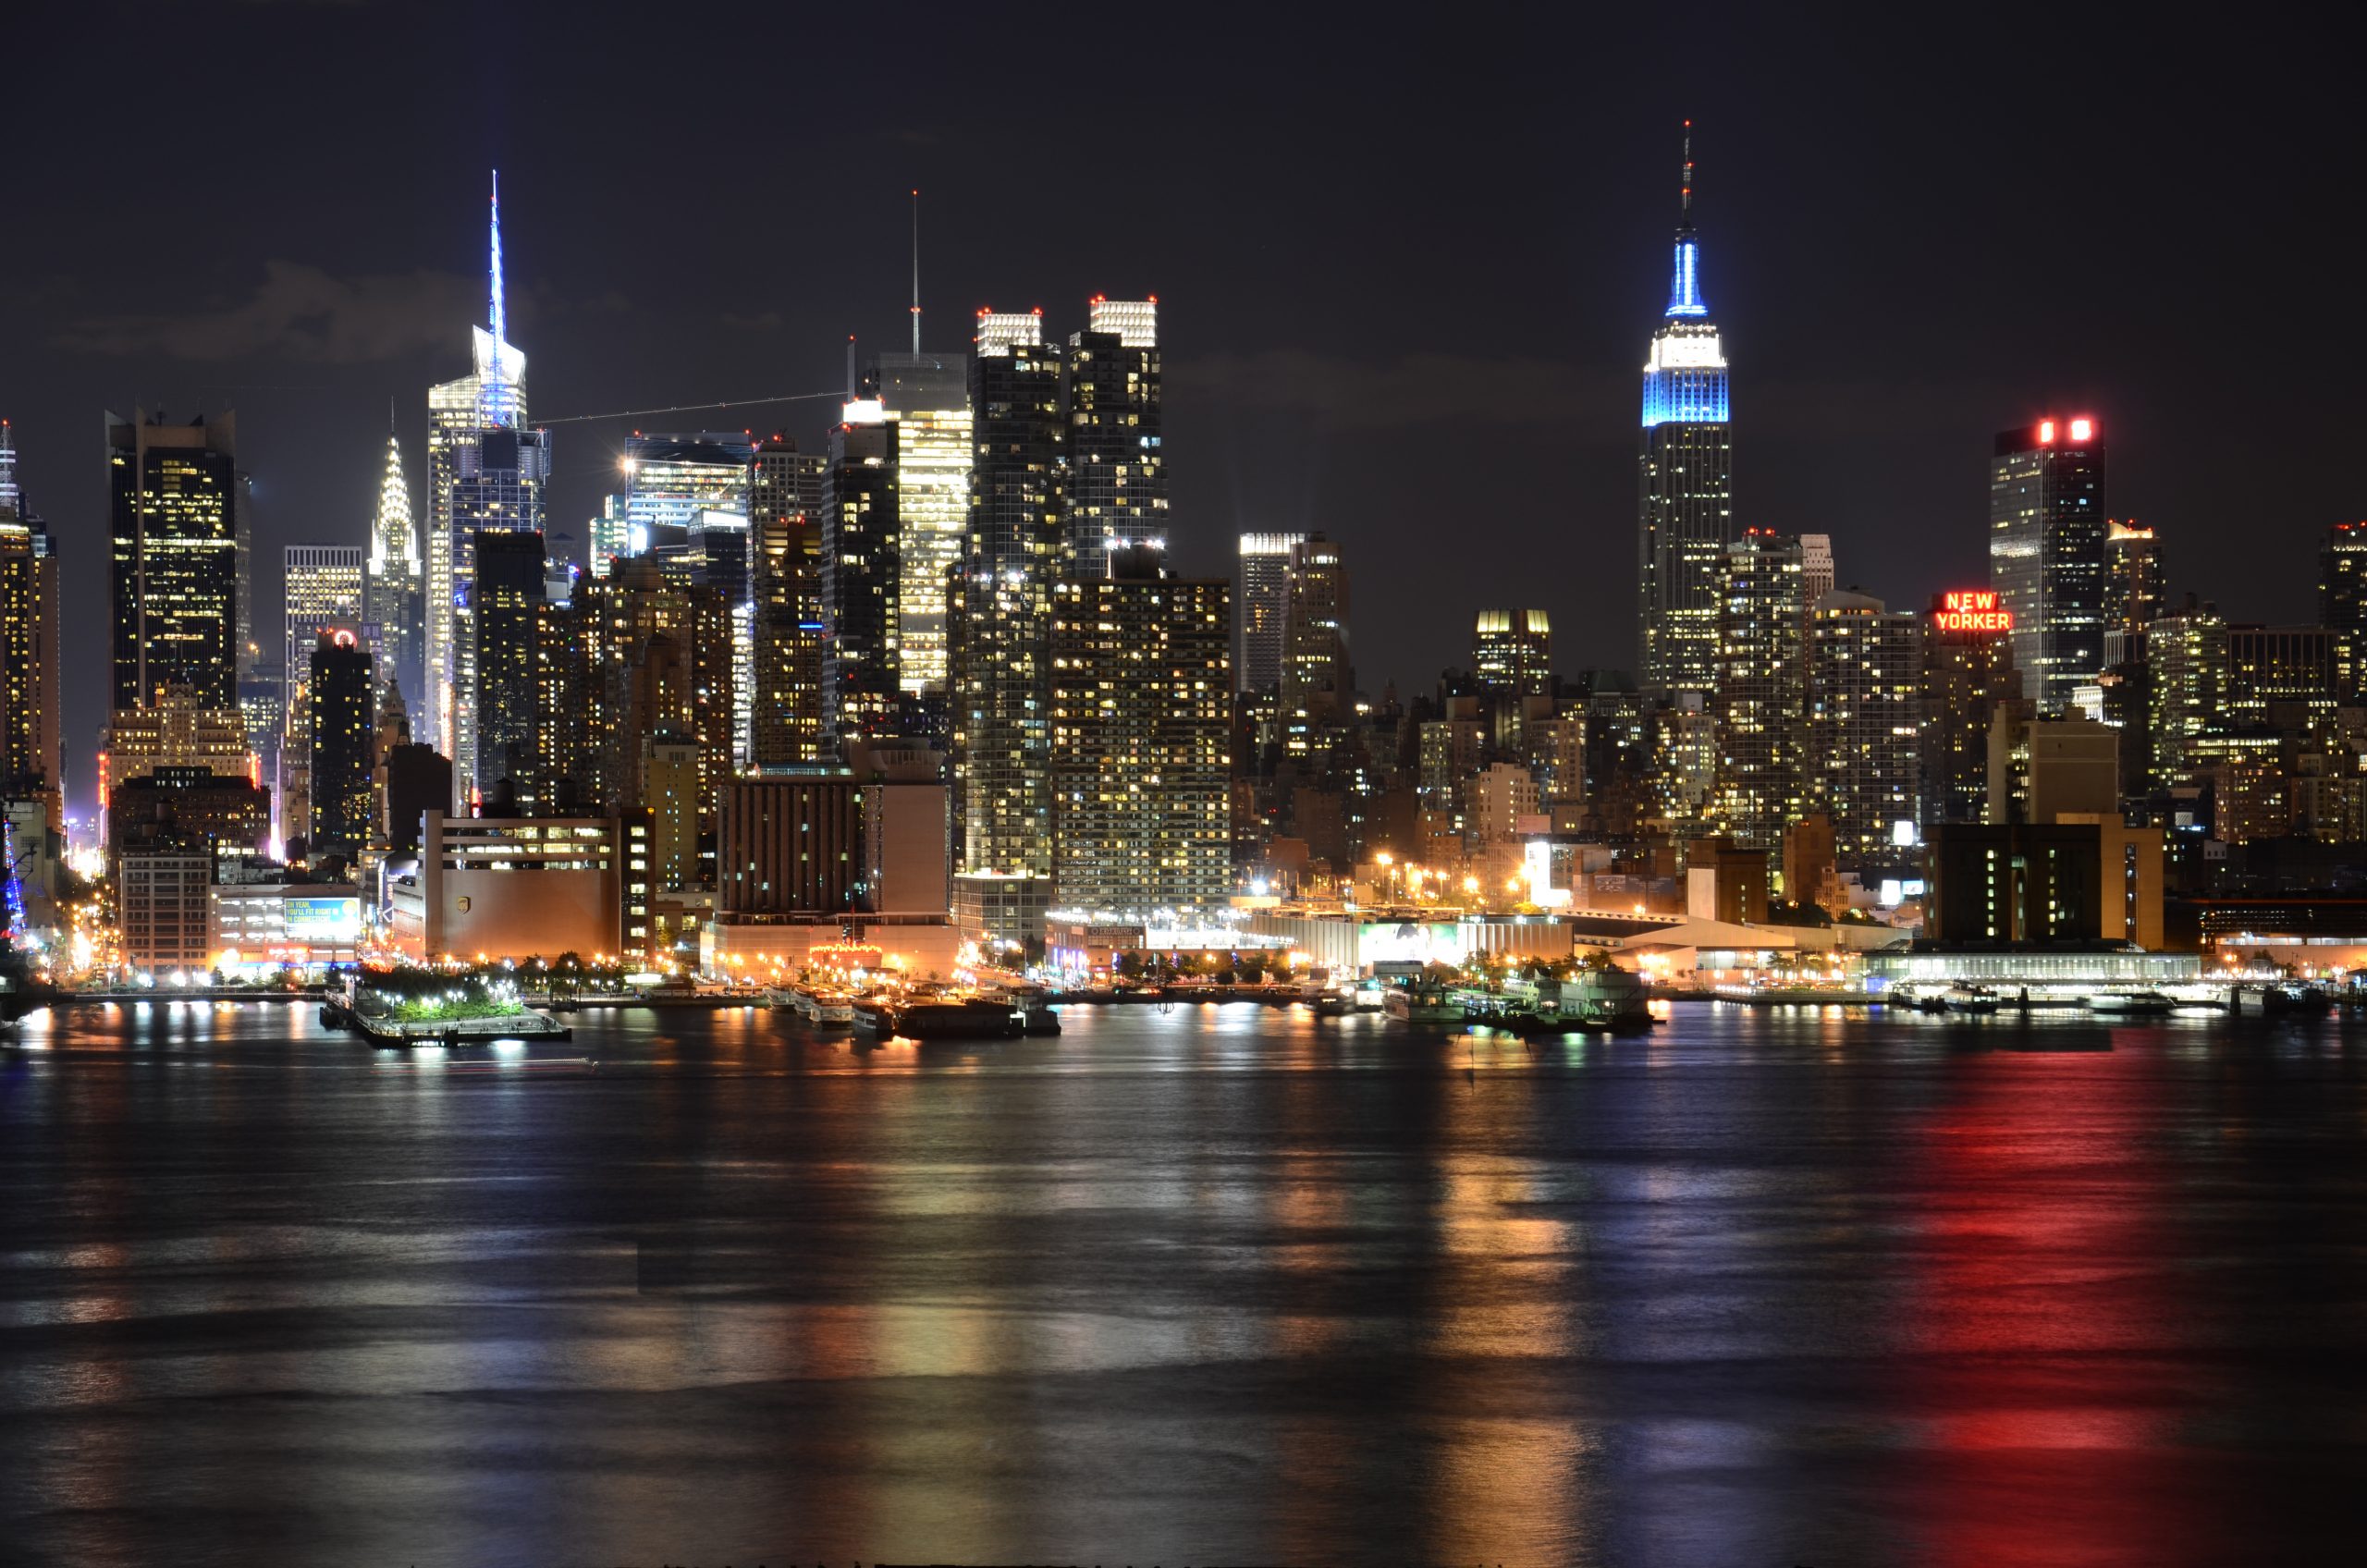 New York Commercial Real Estate Values